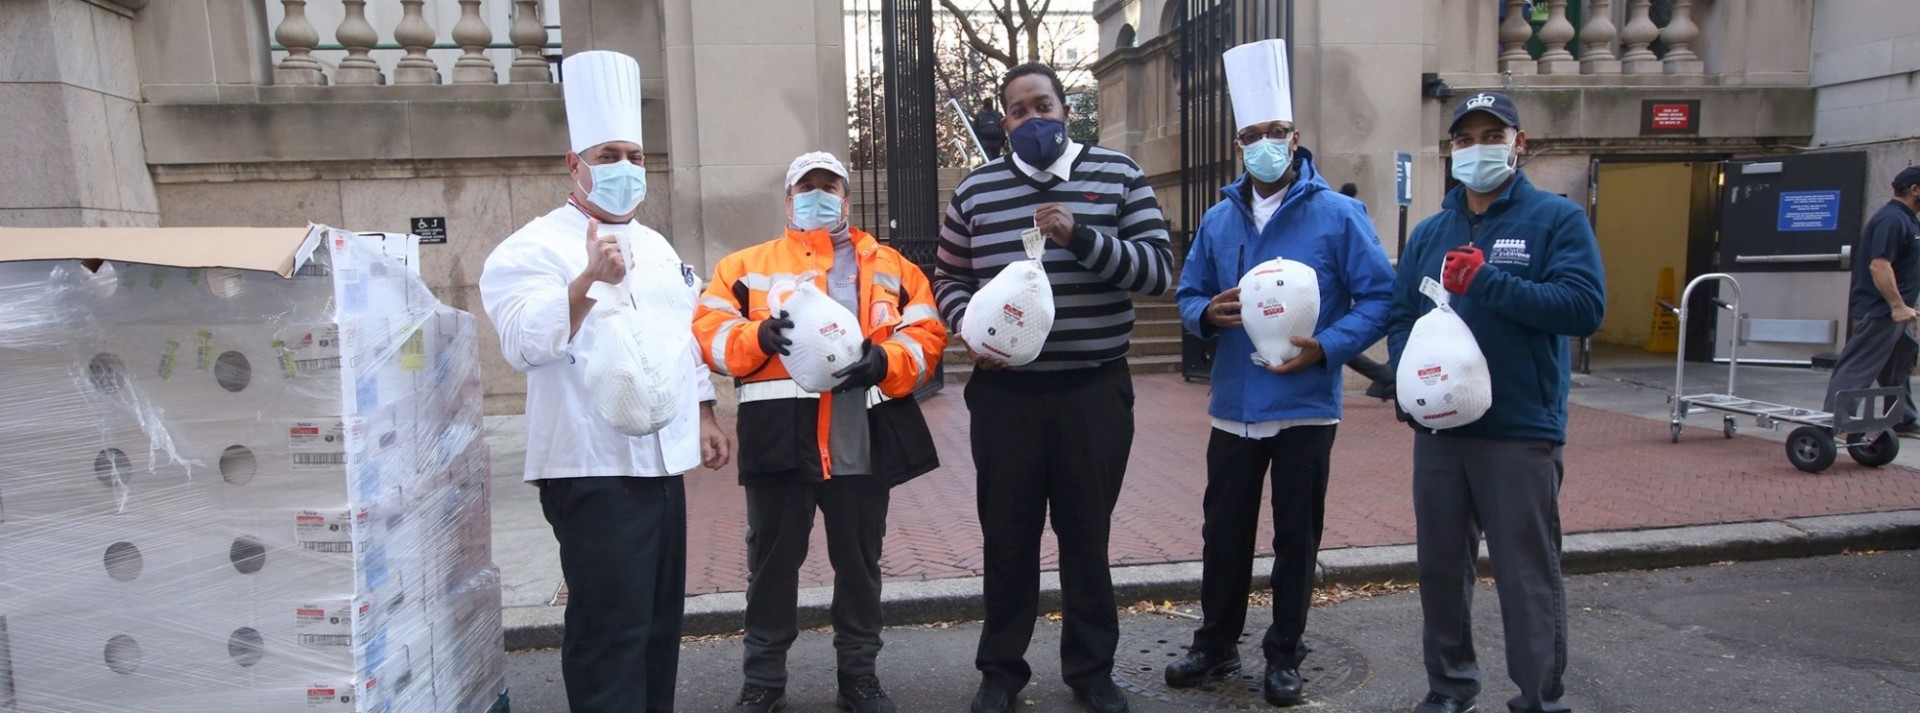 Two chefs and other Columbia Dining team members stand in the street holding turkeys in their hand, next to a pallet full of donated goods